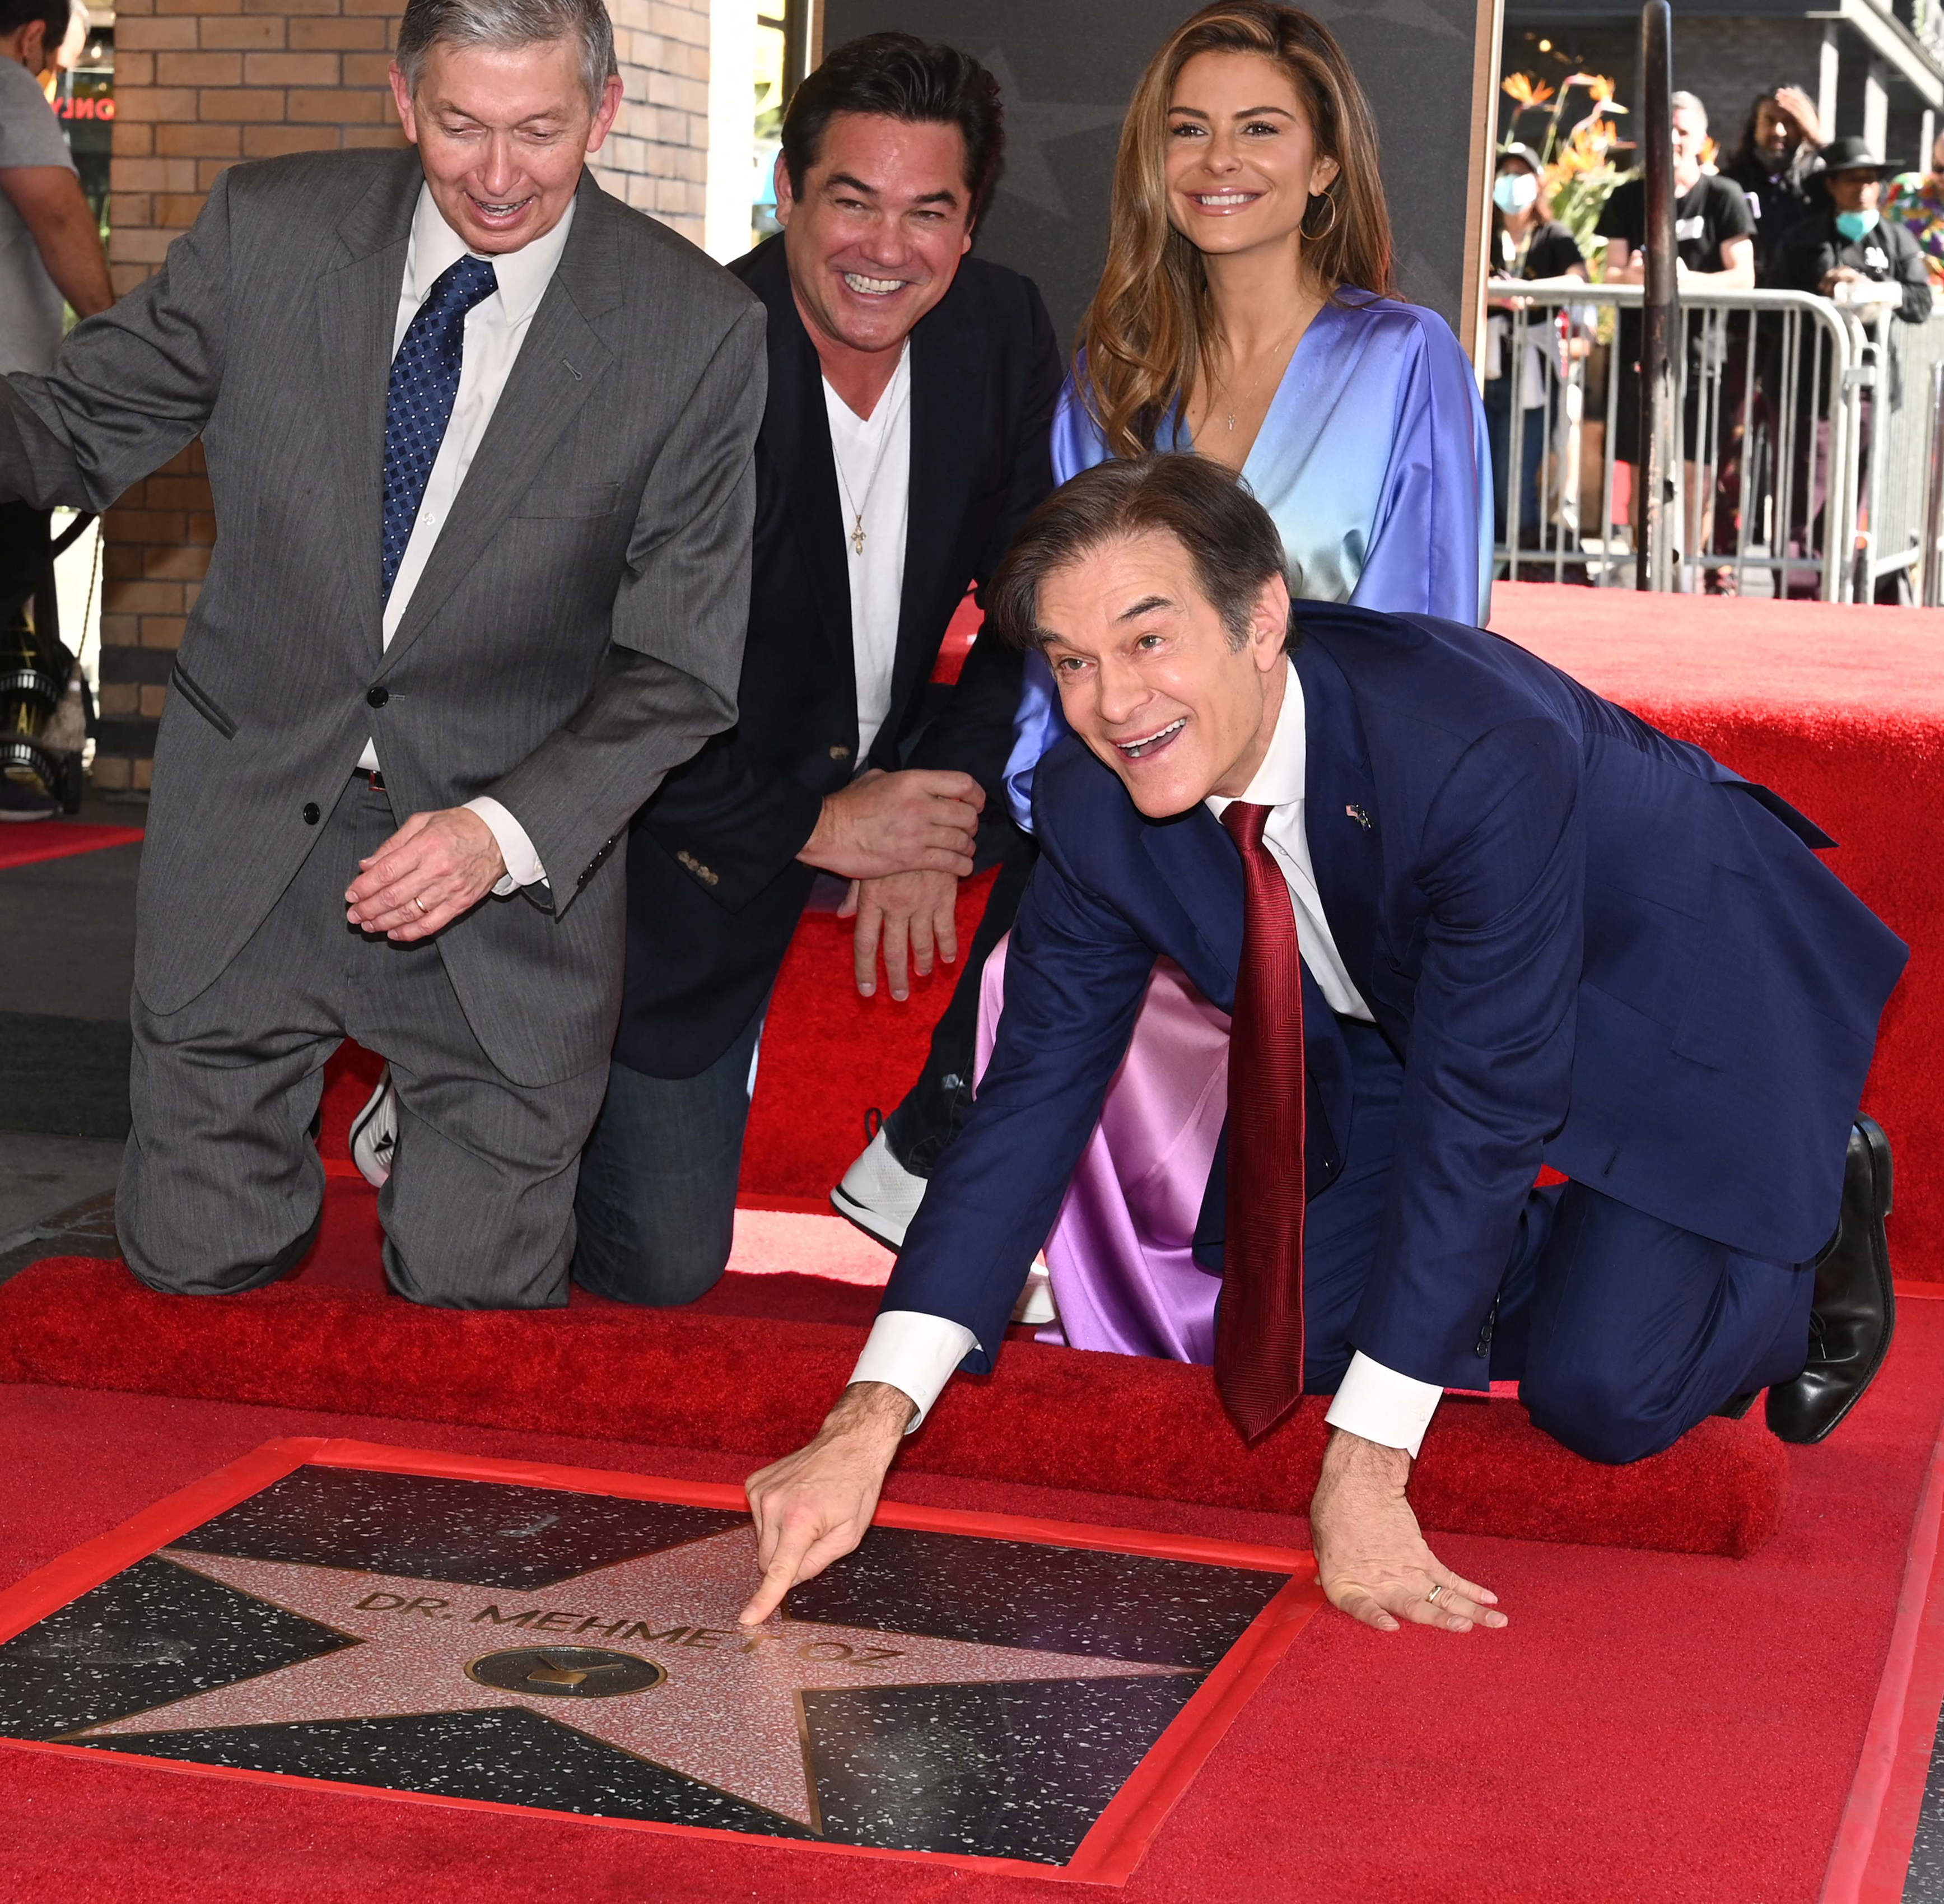 The celebrity heart surgeon, who recently ended his daytime TV “Dr. Oz Show” to run for U.S. Senate in Pennsylvania, got his star Friday on the Hollywood Walk of Fame just as he was being attacked 2,000 miles away in a rival’s TV ad saying he’s too “Hollywood.”<br> <br> Oz was introduced at the ceremony by TV personality Maria Menounos (second from right) and actor Dean Cain (second from left), and gave a seven-minute speech that echoed themes of his campaign that have positioned him as a free-thinking health expert who helps people.